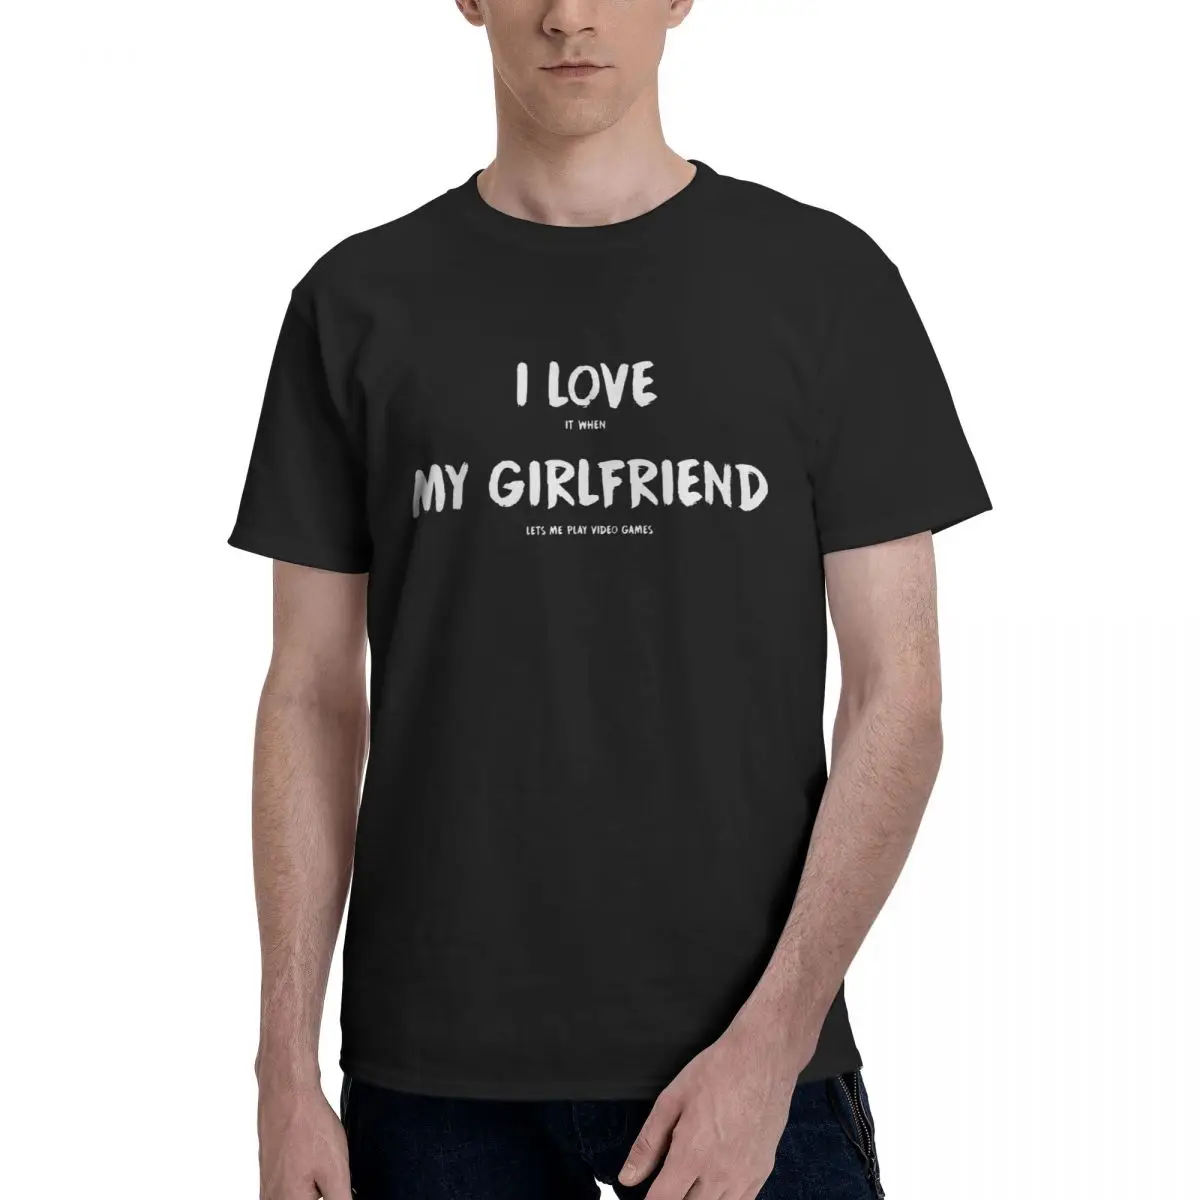 

I Love It When My Girlfriend Lets Me Play Video Games Men's Novelty Short Sleeve Round Collar Cotton T-Shirt